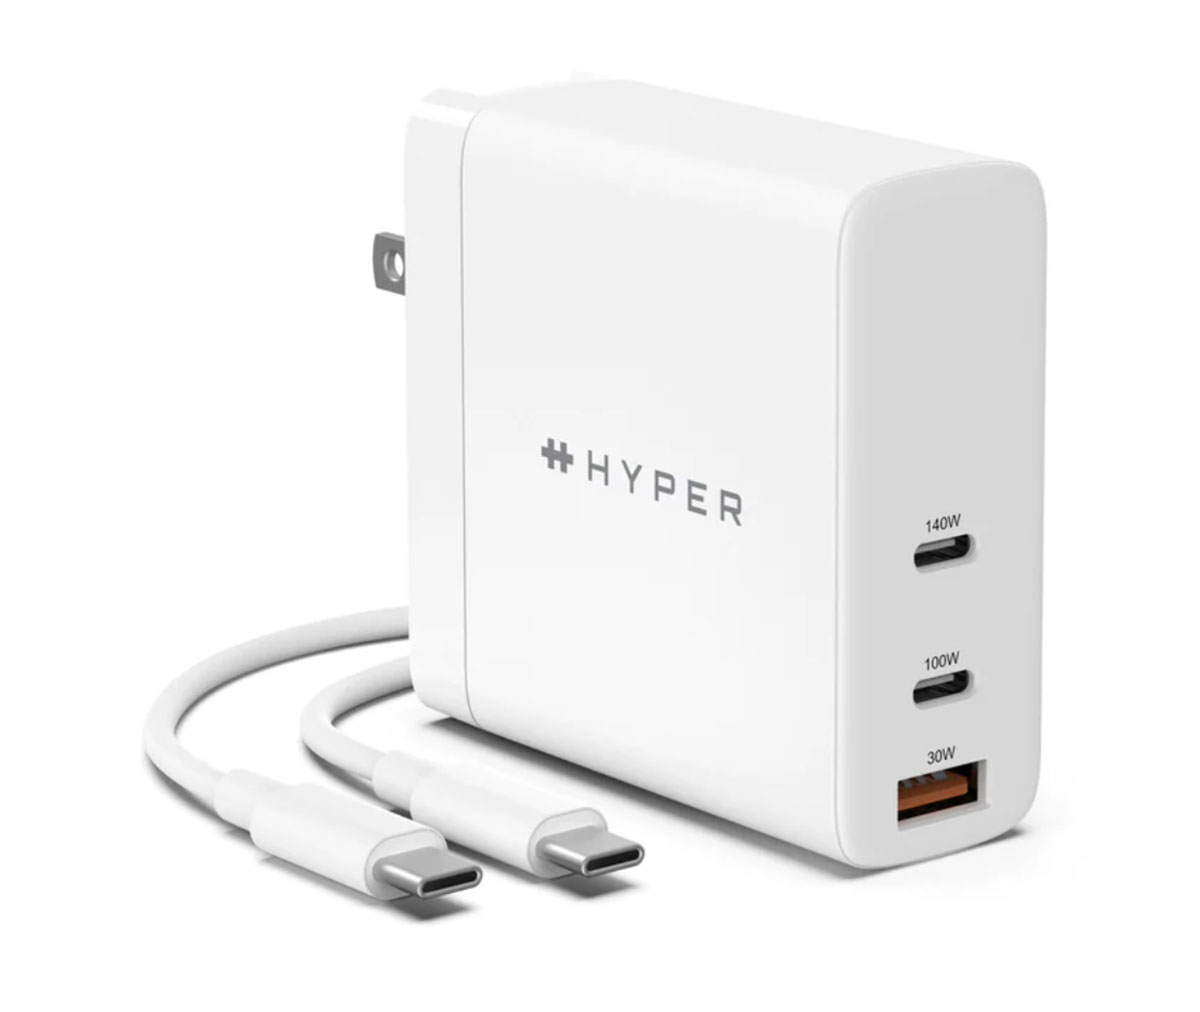 Hyperjuice 140W charger